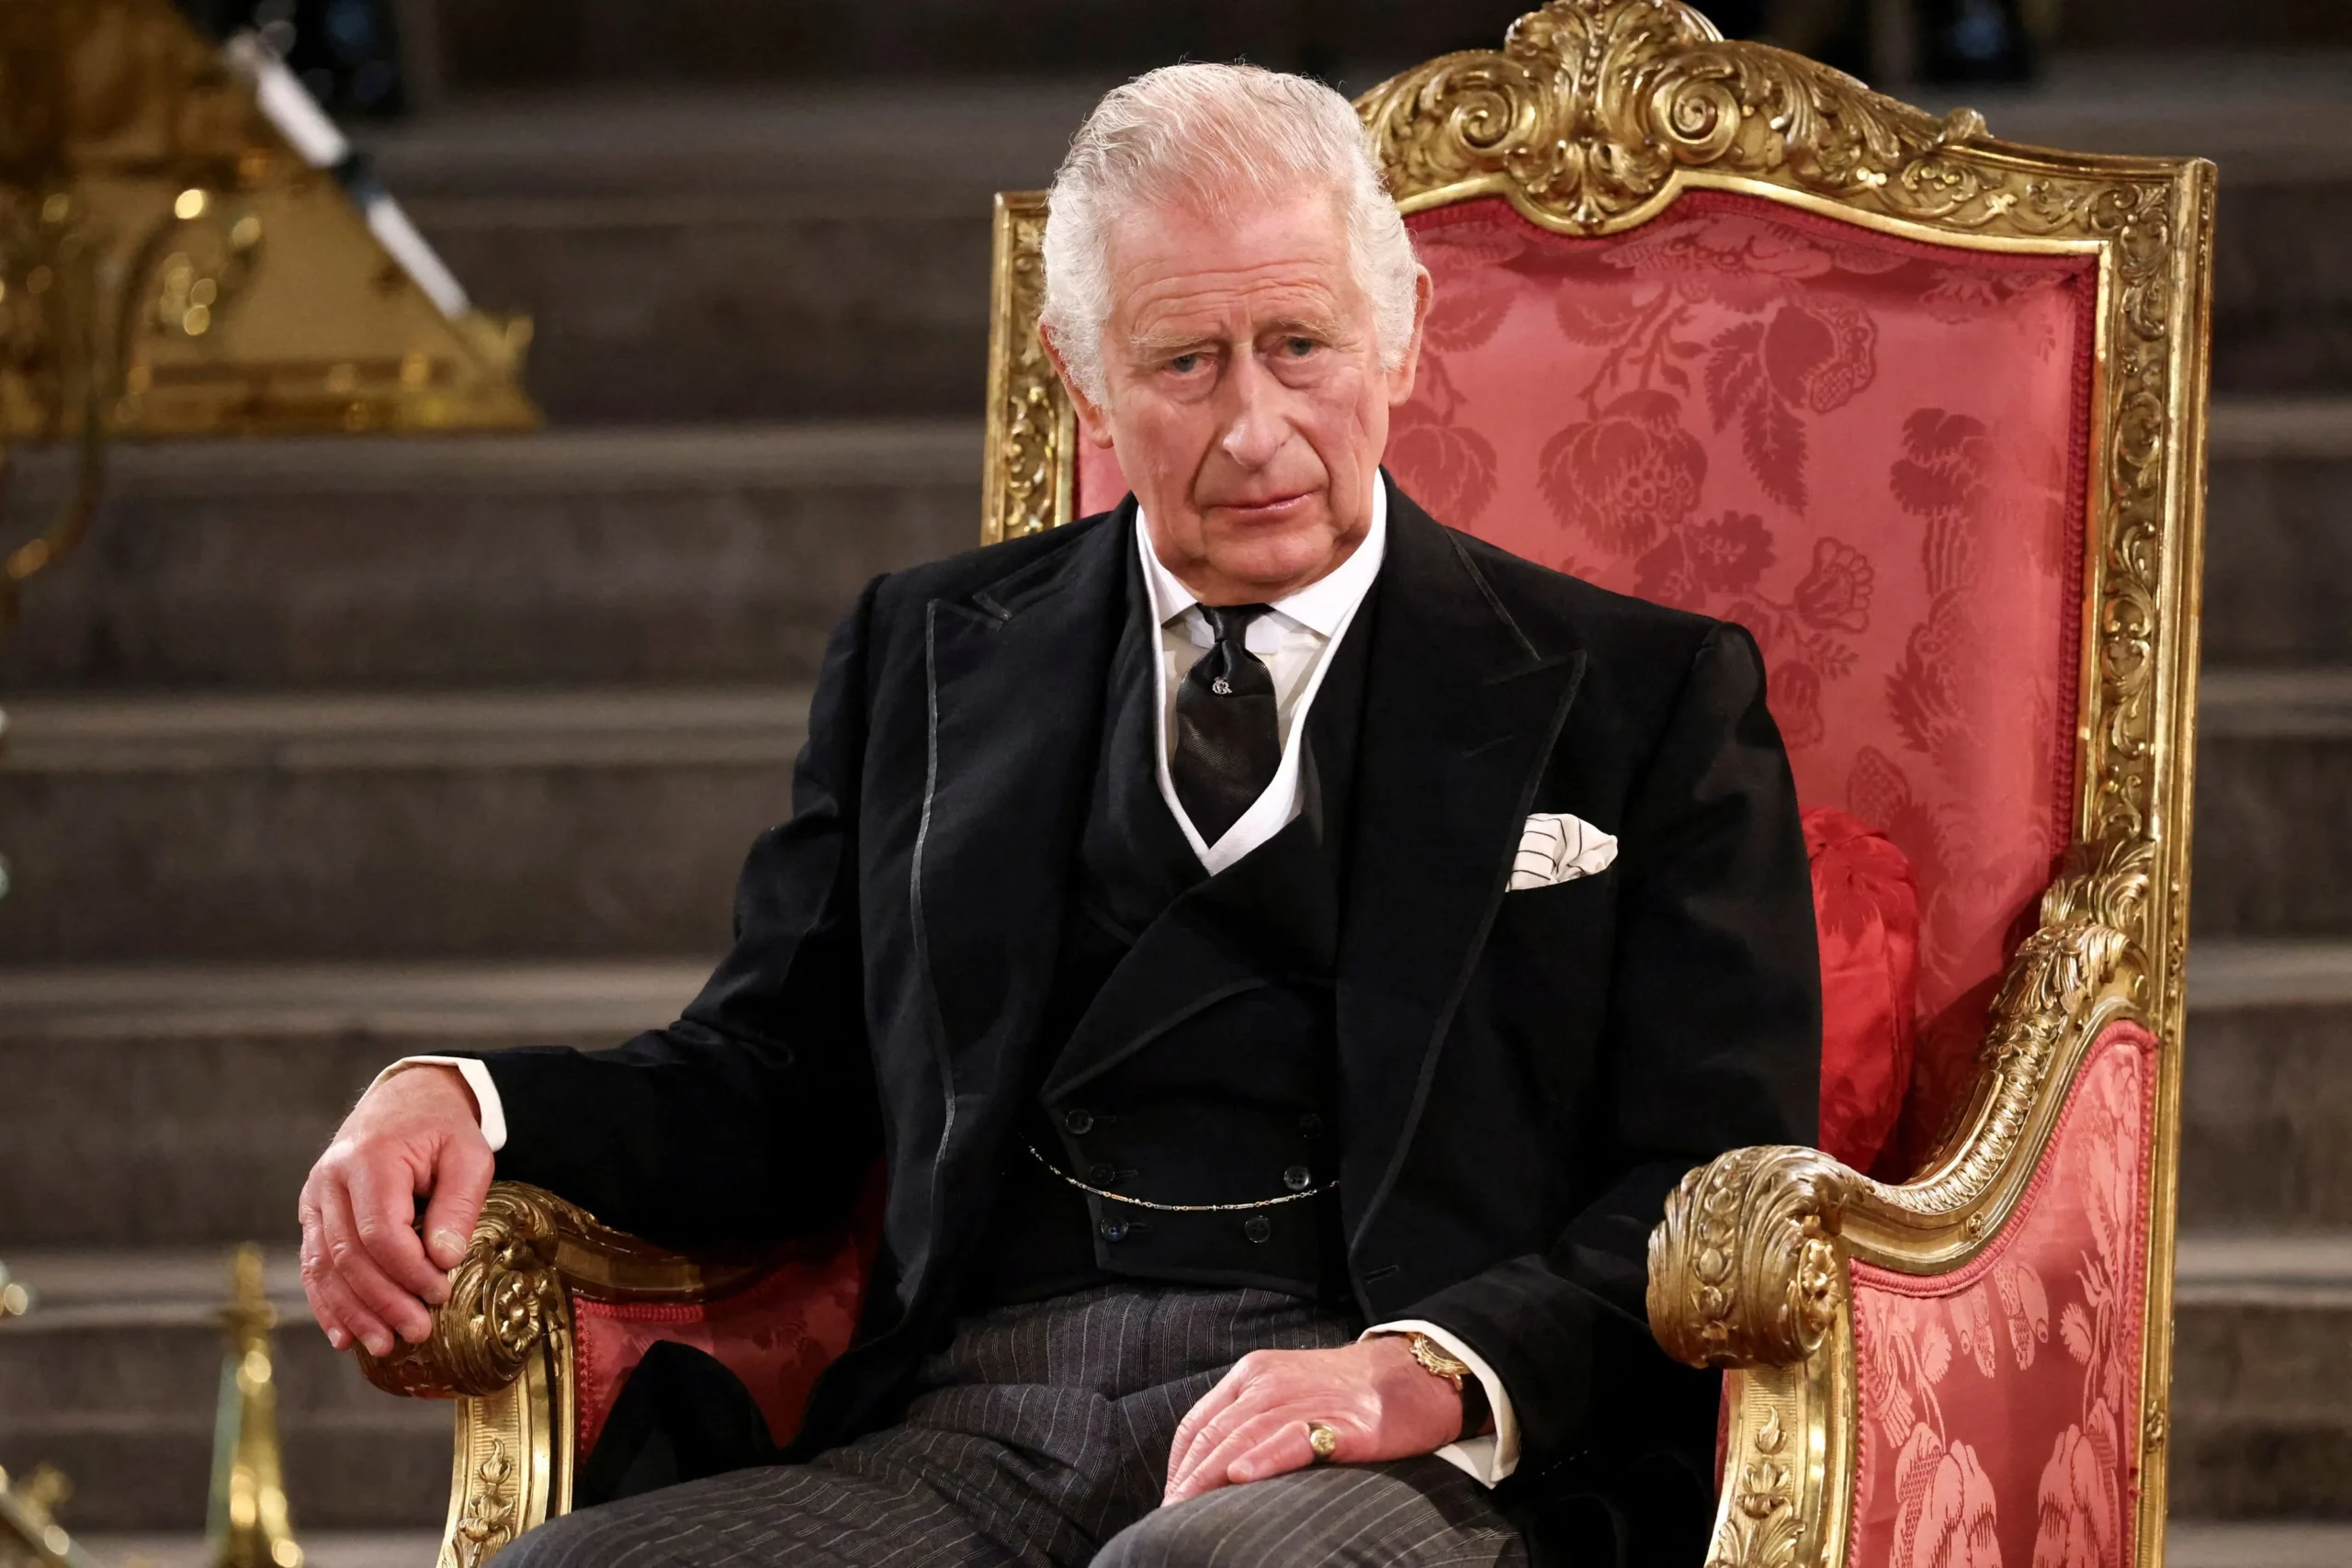 King Charles III to Shortly Return to ‘Public-Facing Duties’ After Cancer Treatment